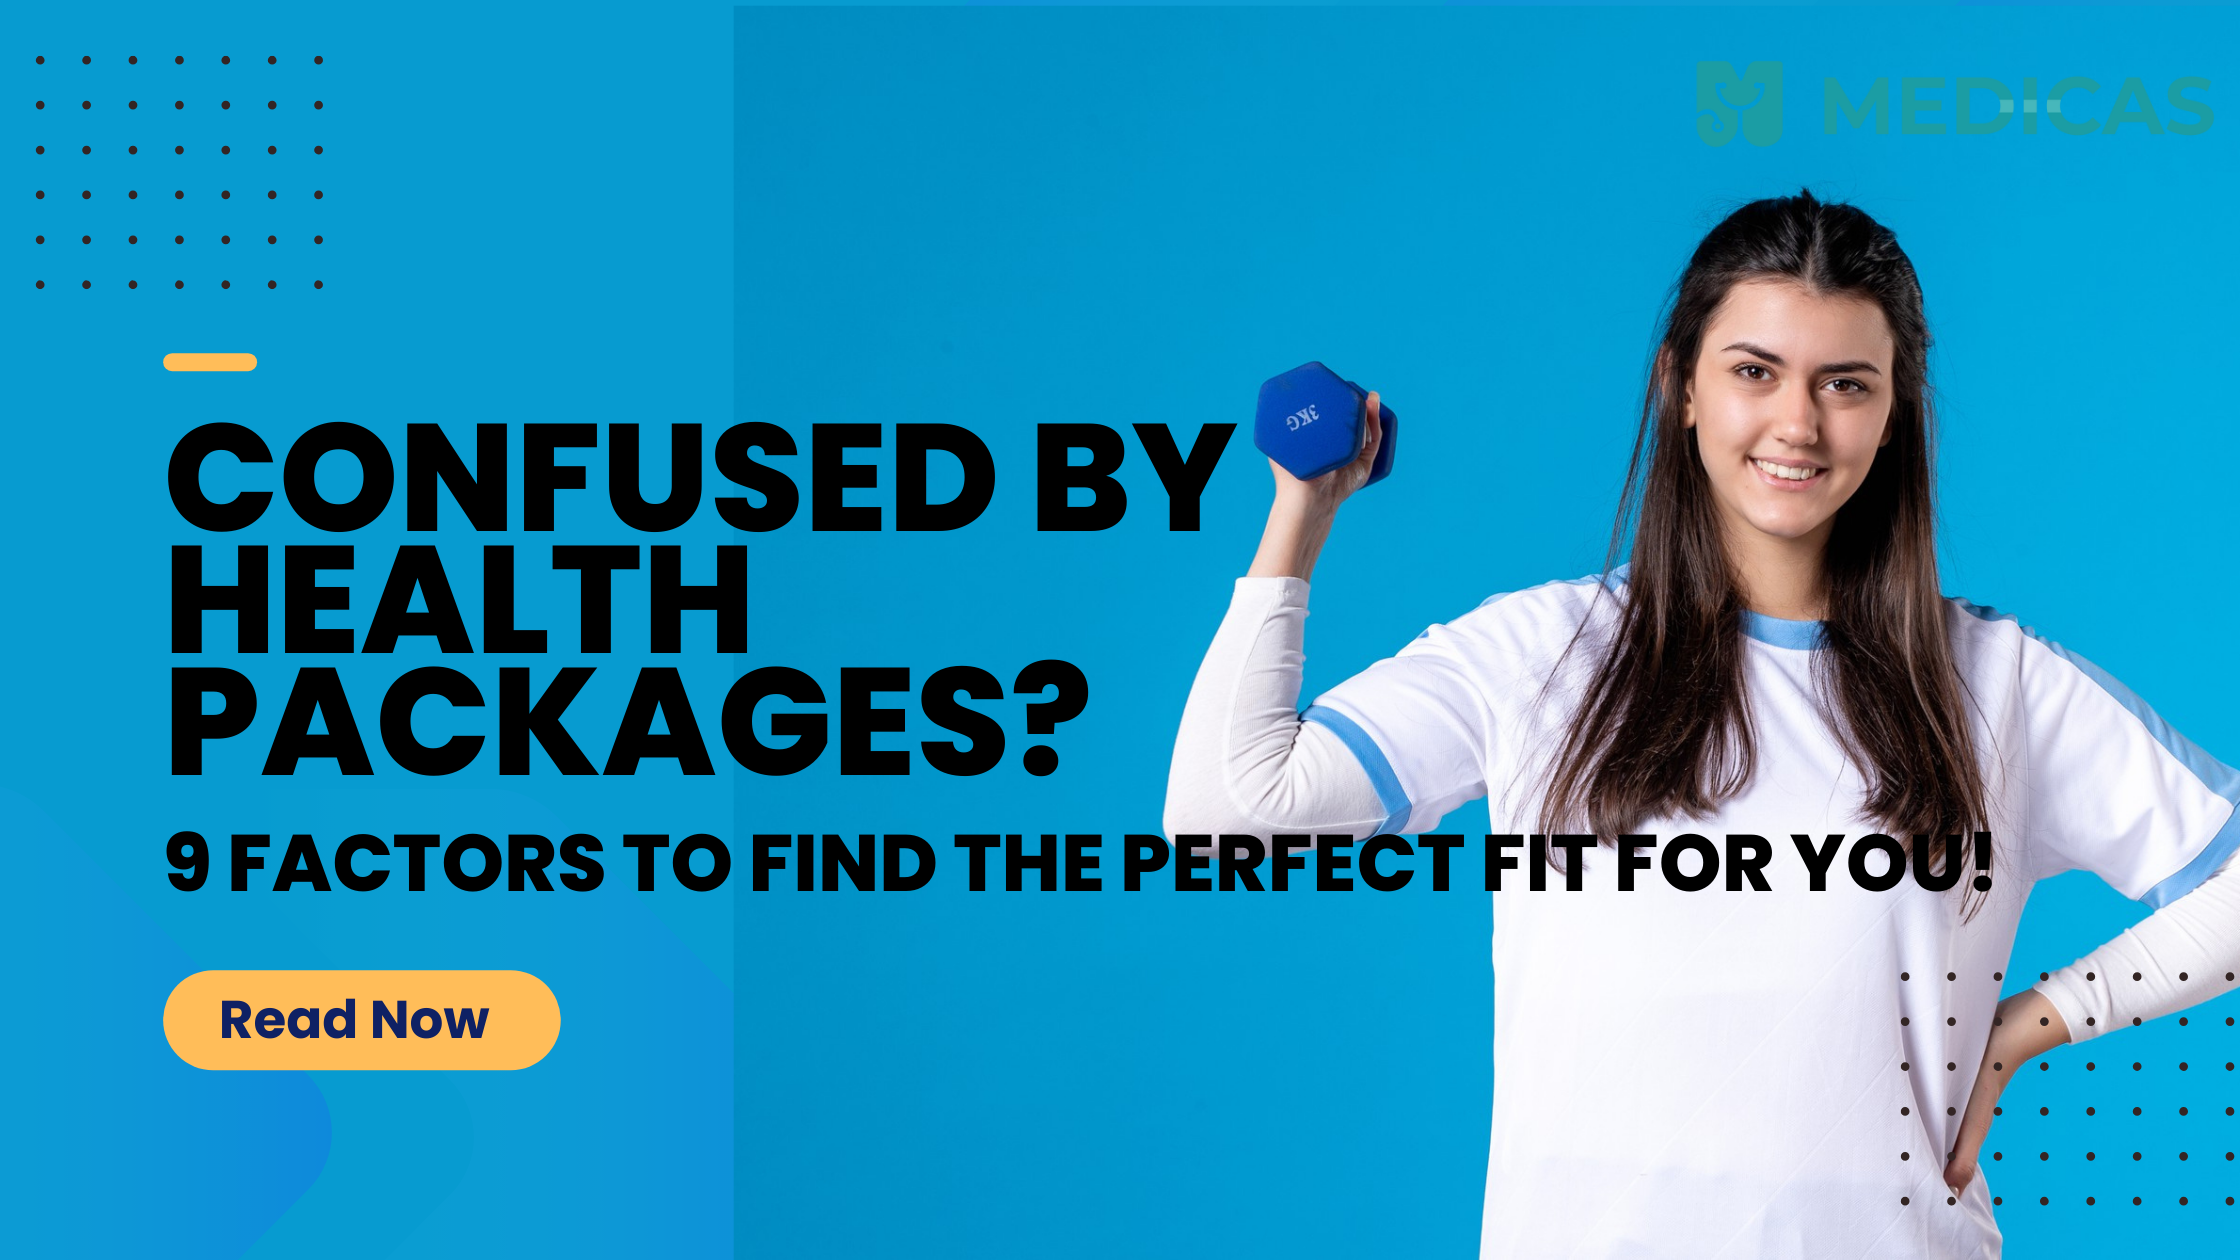 How to find the perfect health package?